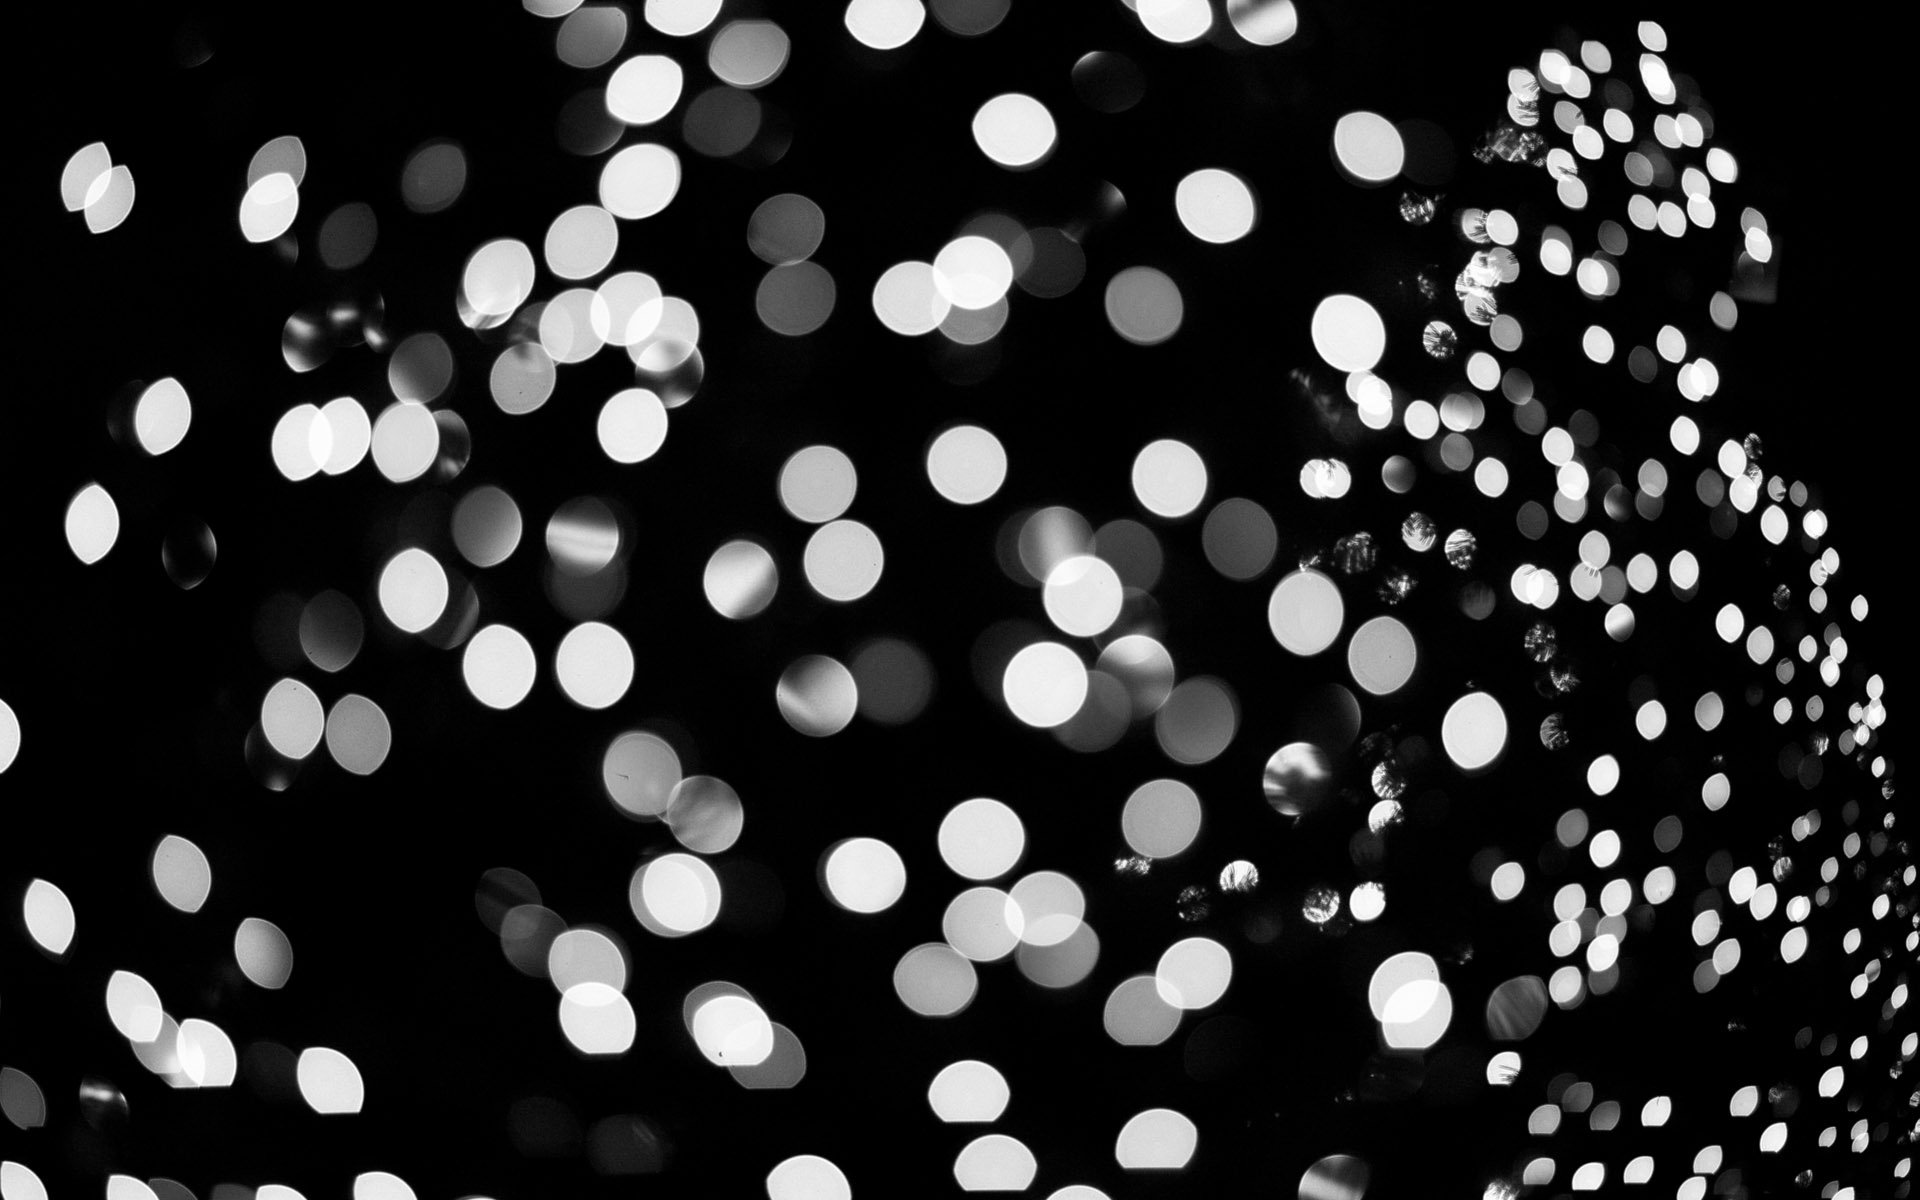 Black And White Backgrounds 6891 Hd Wallpapers in Others   Imagesci